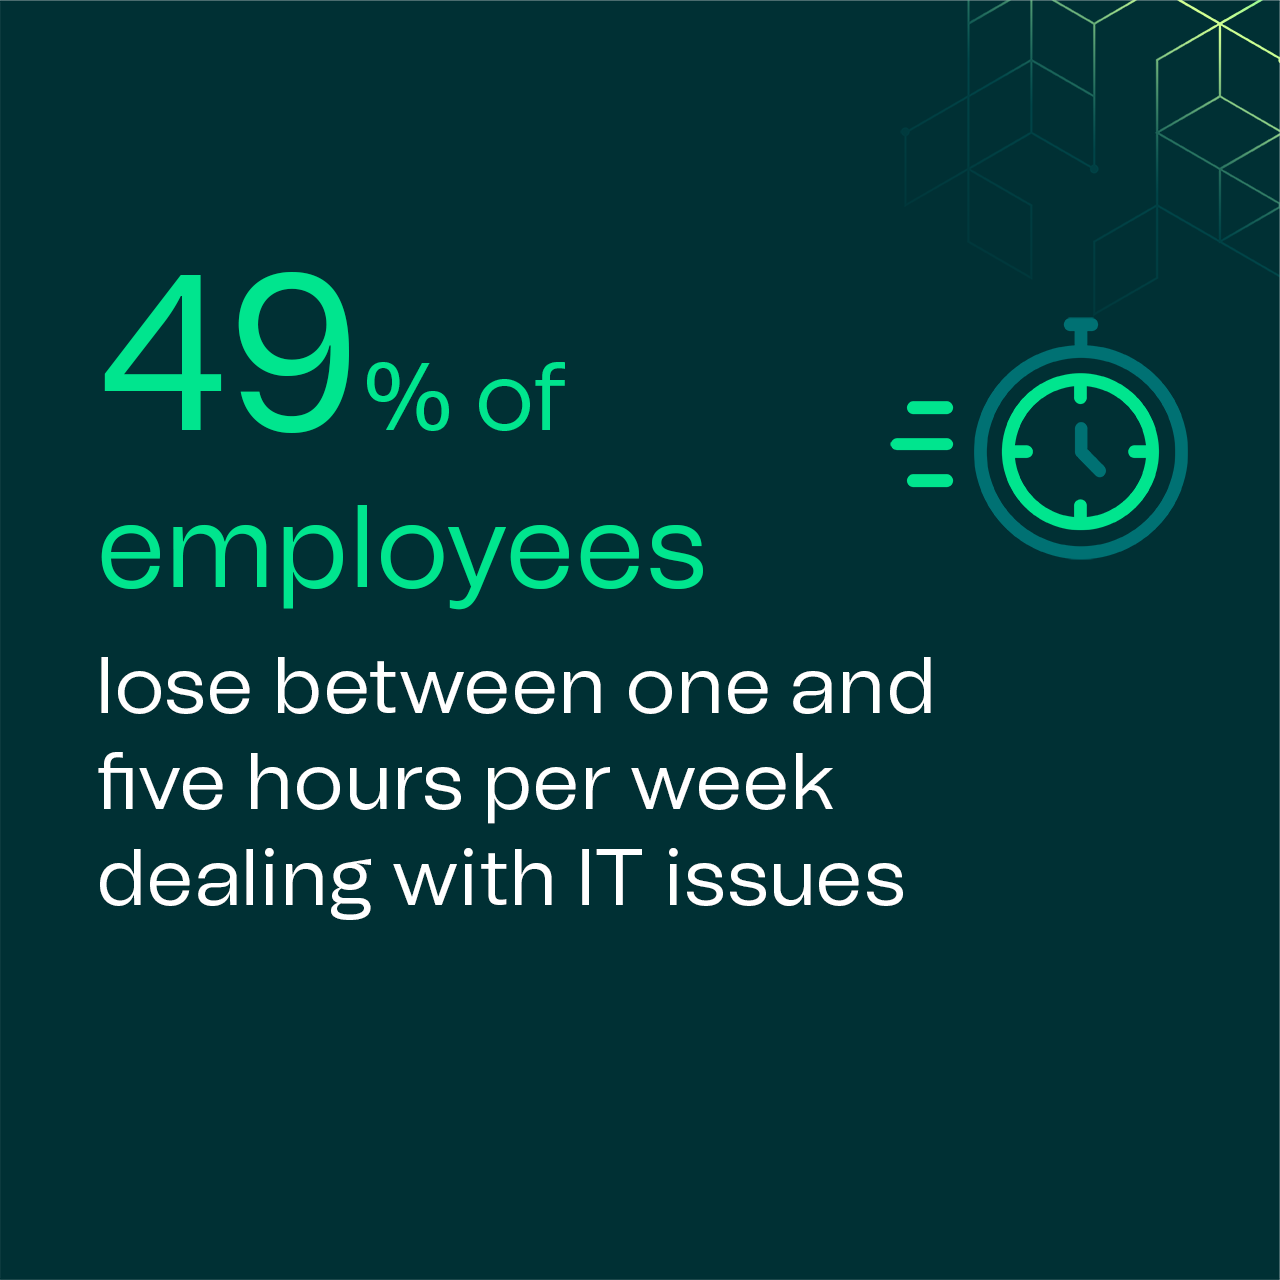 49% of employees lose between one and five hours per week dealing with IT issues